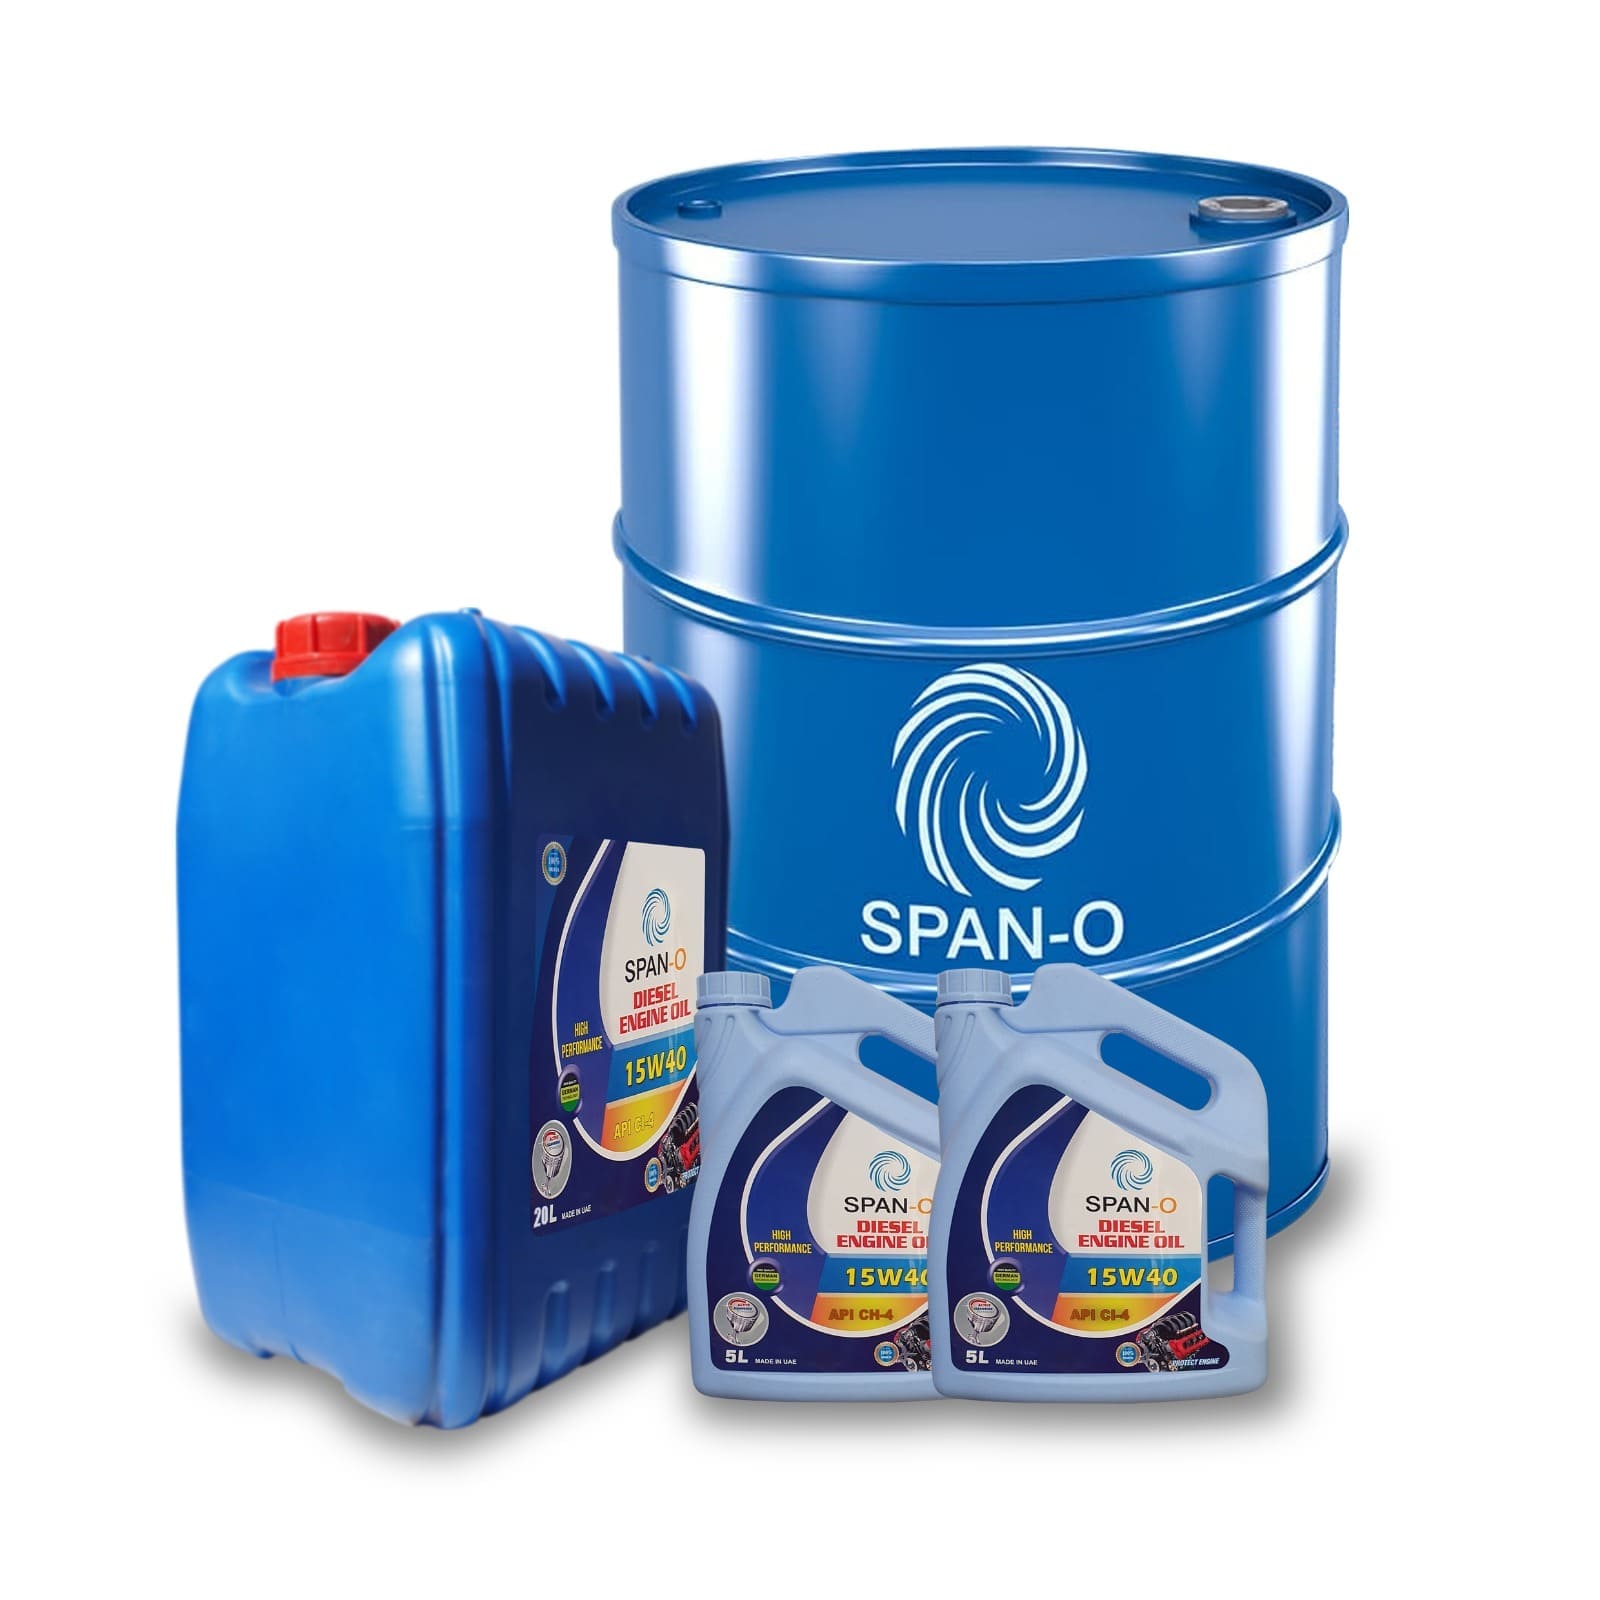 Experience Premium Quality with SPAN-O Lubricants